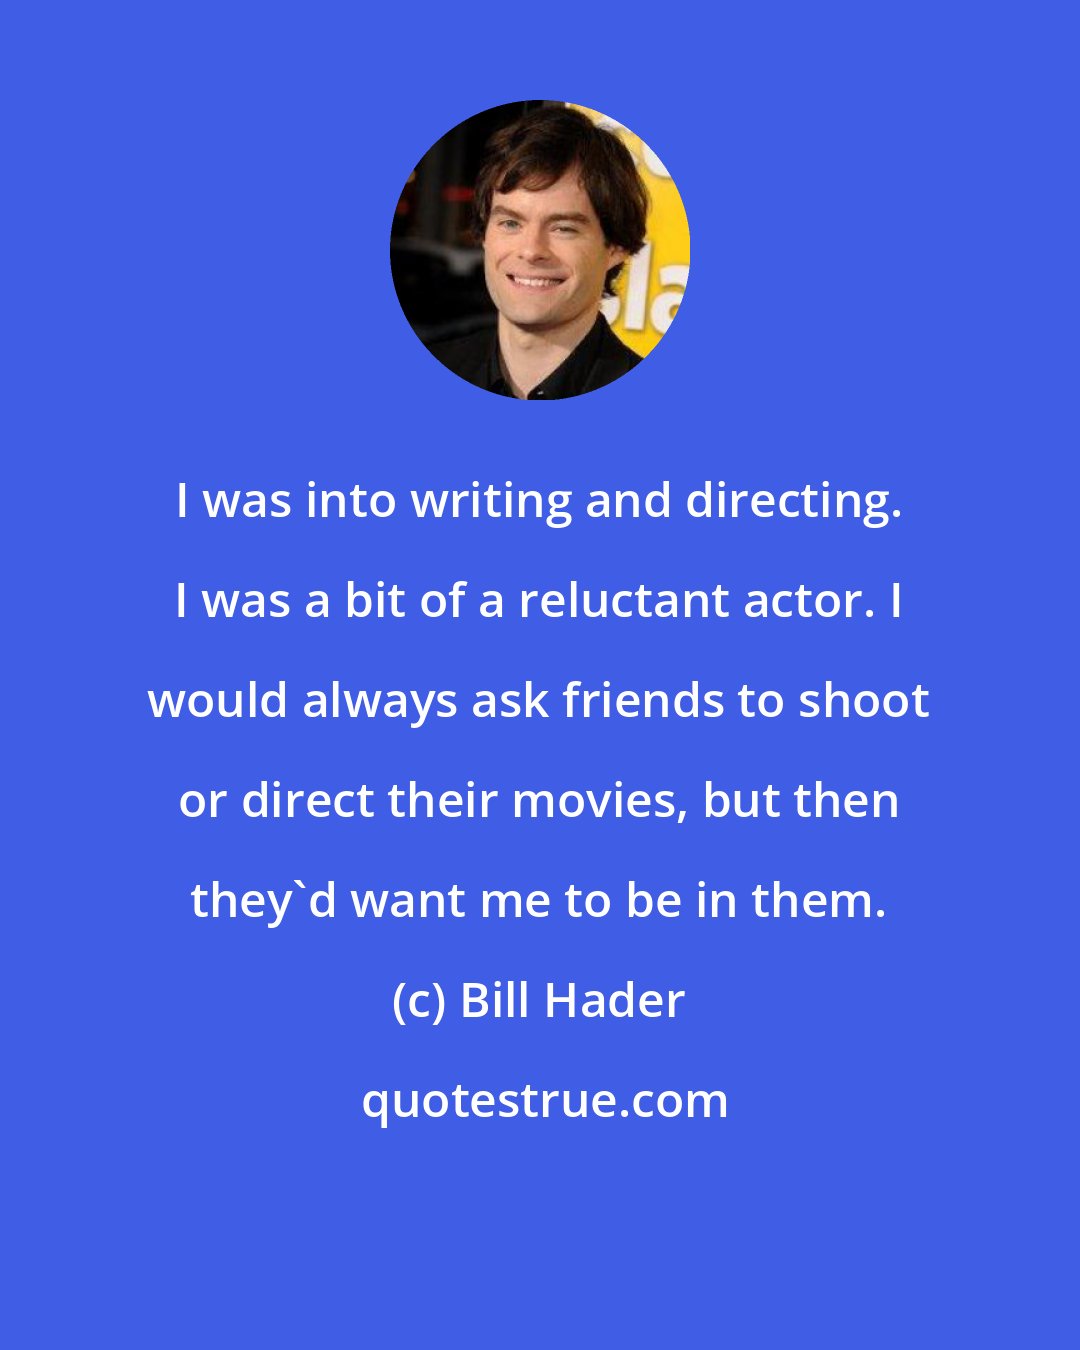 Bill Hader: I was into writing and directing. I was a bit of a reluctant actor. I would always ask friends to shoot or direct their movies, but then they'd want me to be in them.